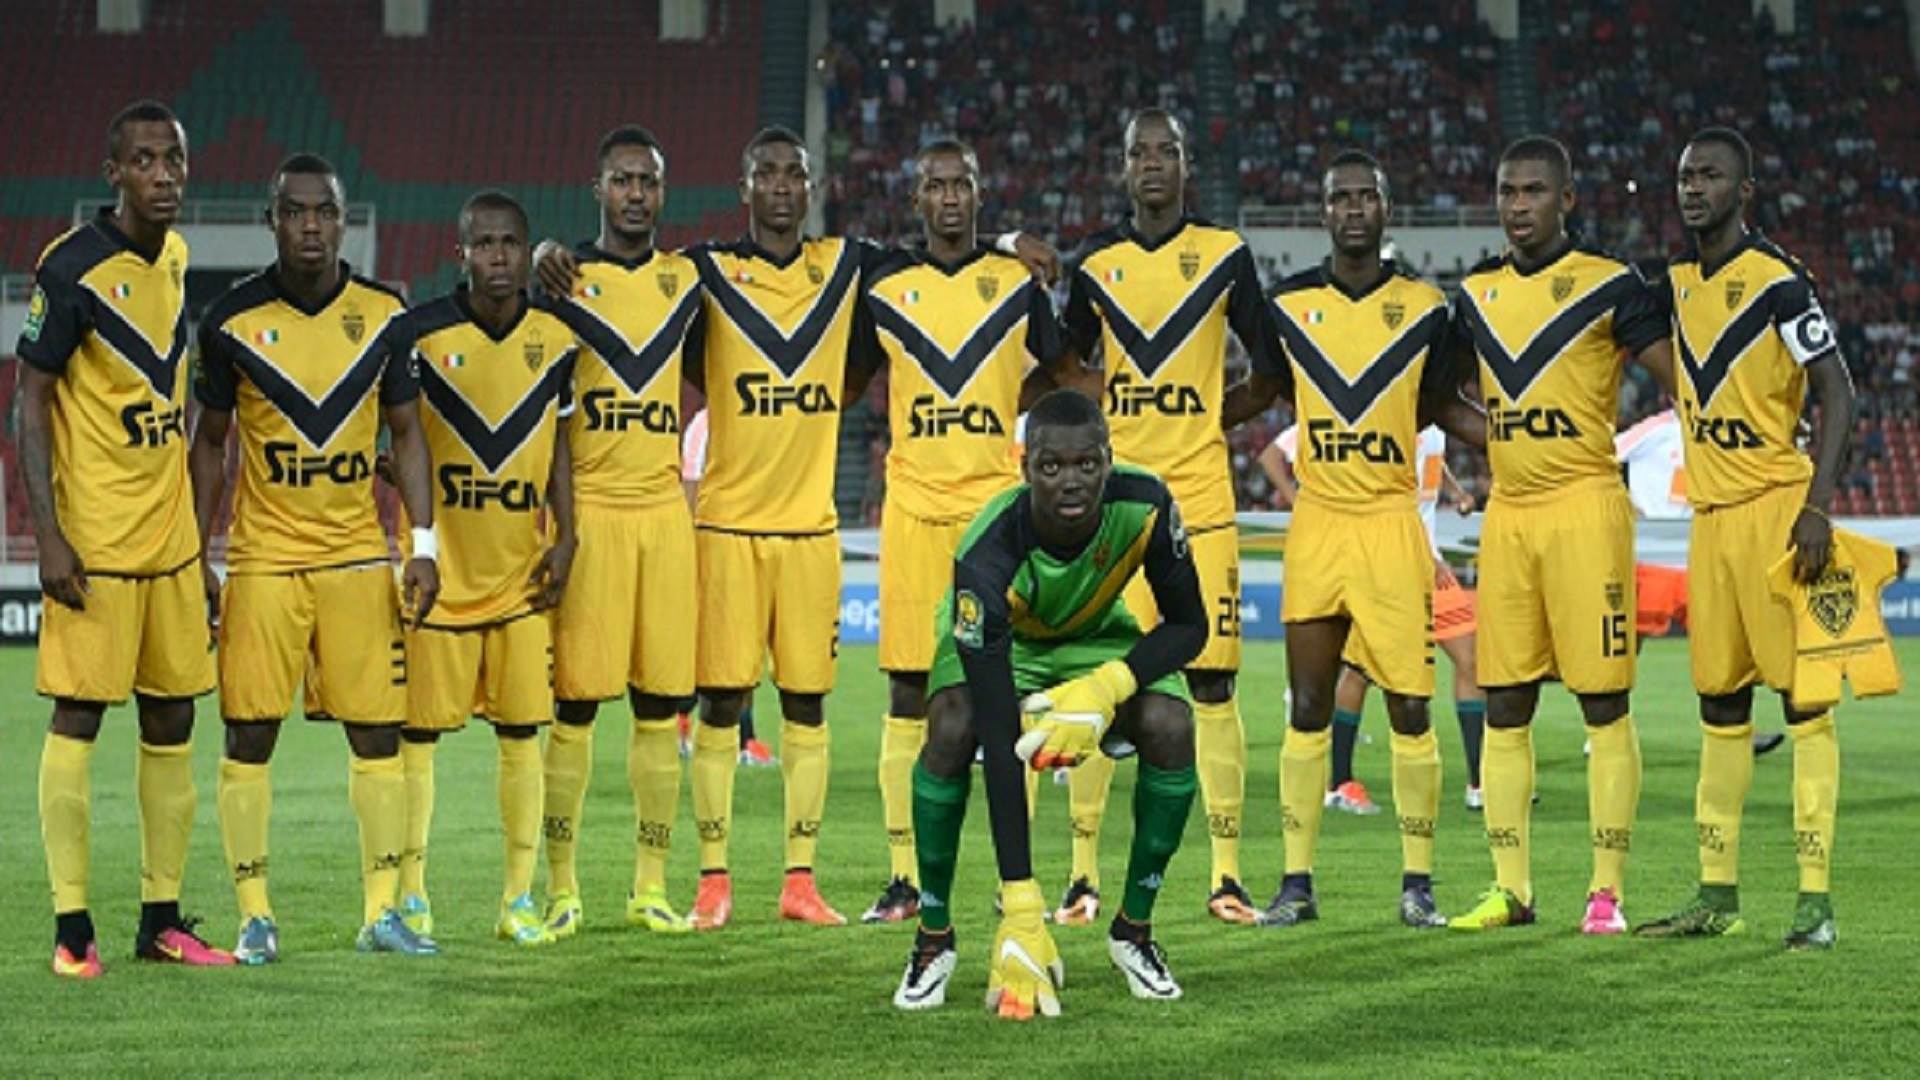 ASEC Mimosas - 11 appearances in the CAFCL group s